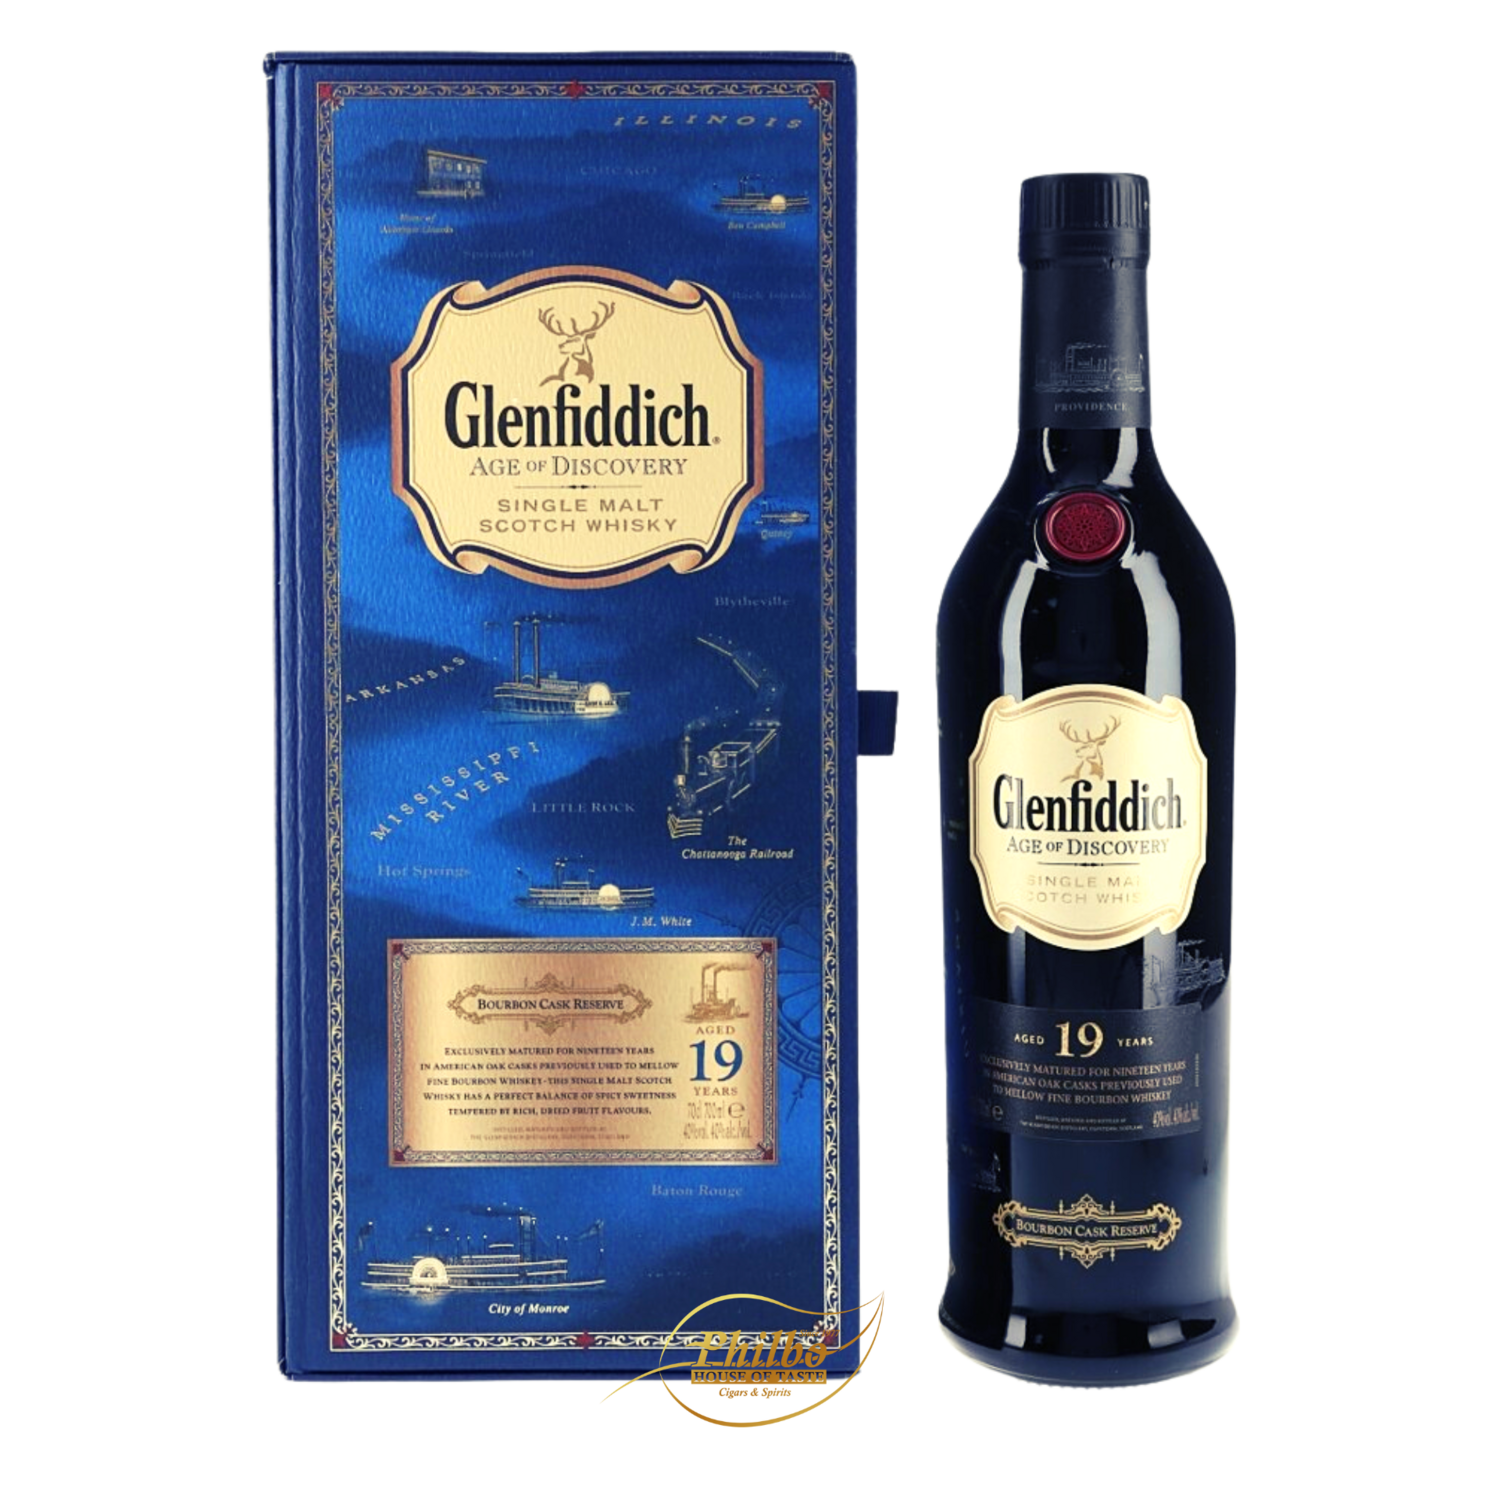 Glenfiddich 19y Age of Discovery Bourbon Cask Reserve 40% 700ml